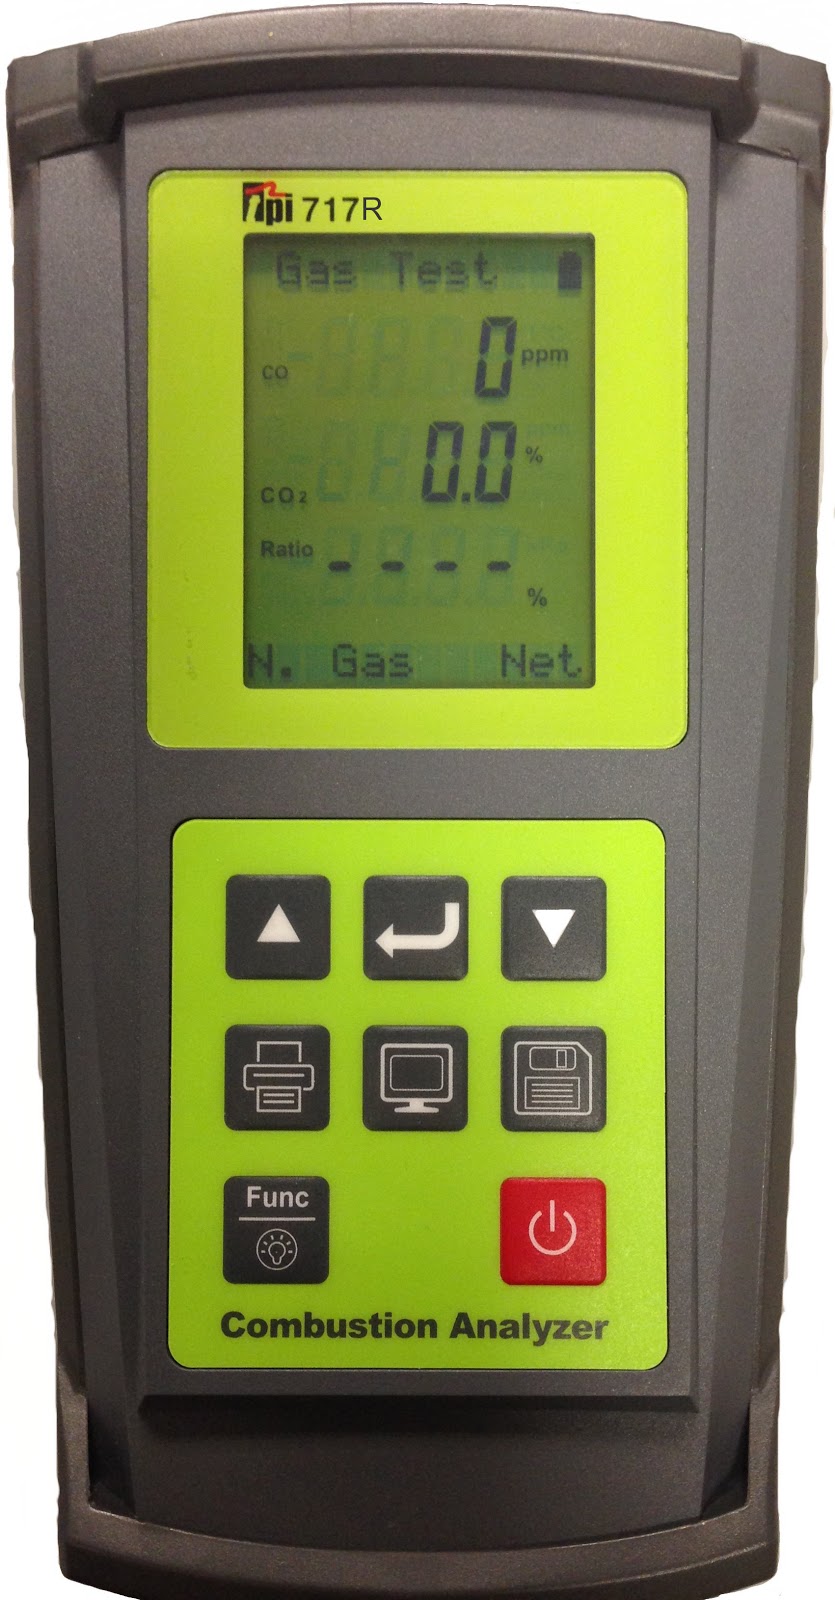 Temperature & Process Instruments | 1767 Central Park Ave Suite 112, Yonkers, NY 10710 | Phone: (914) 673-0333